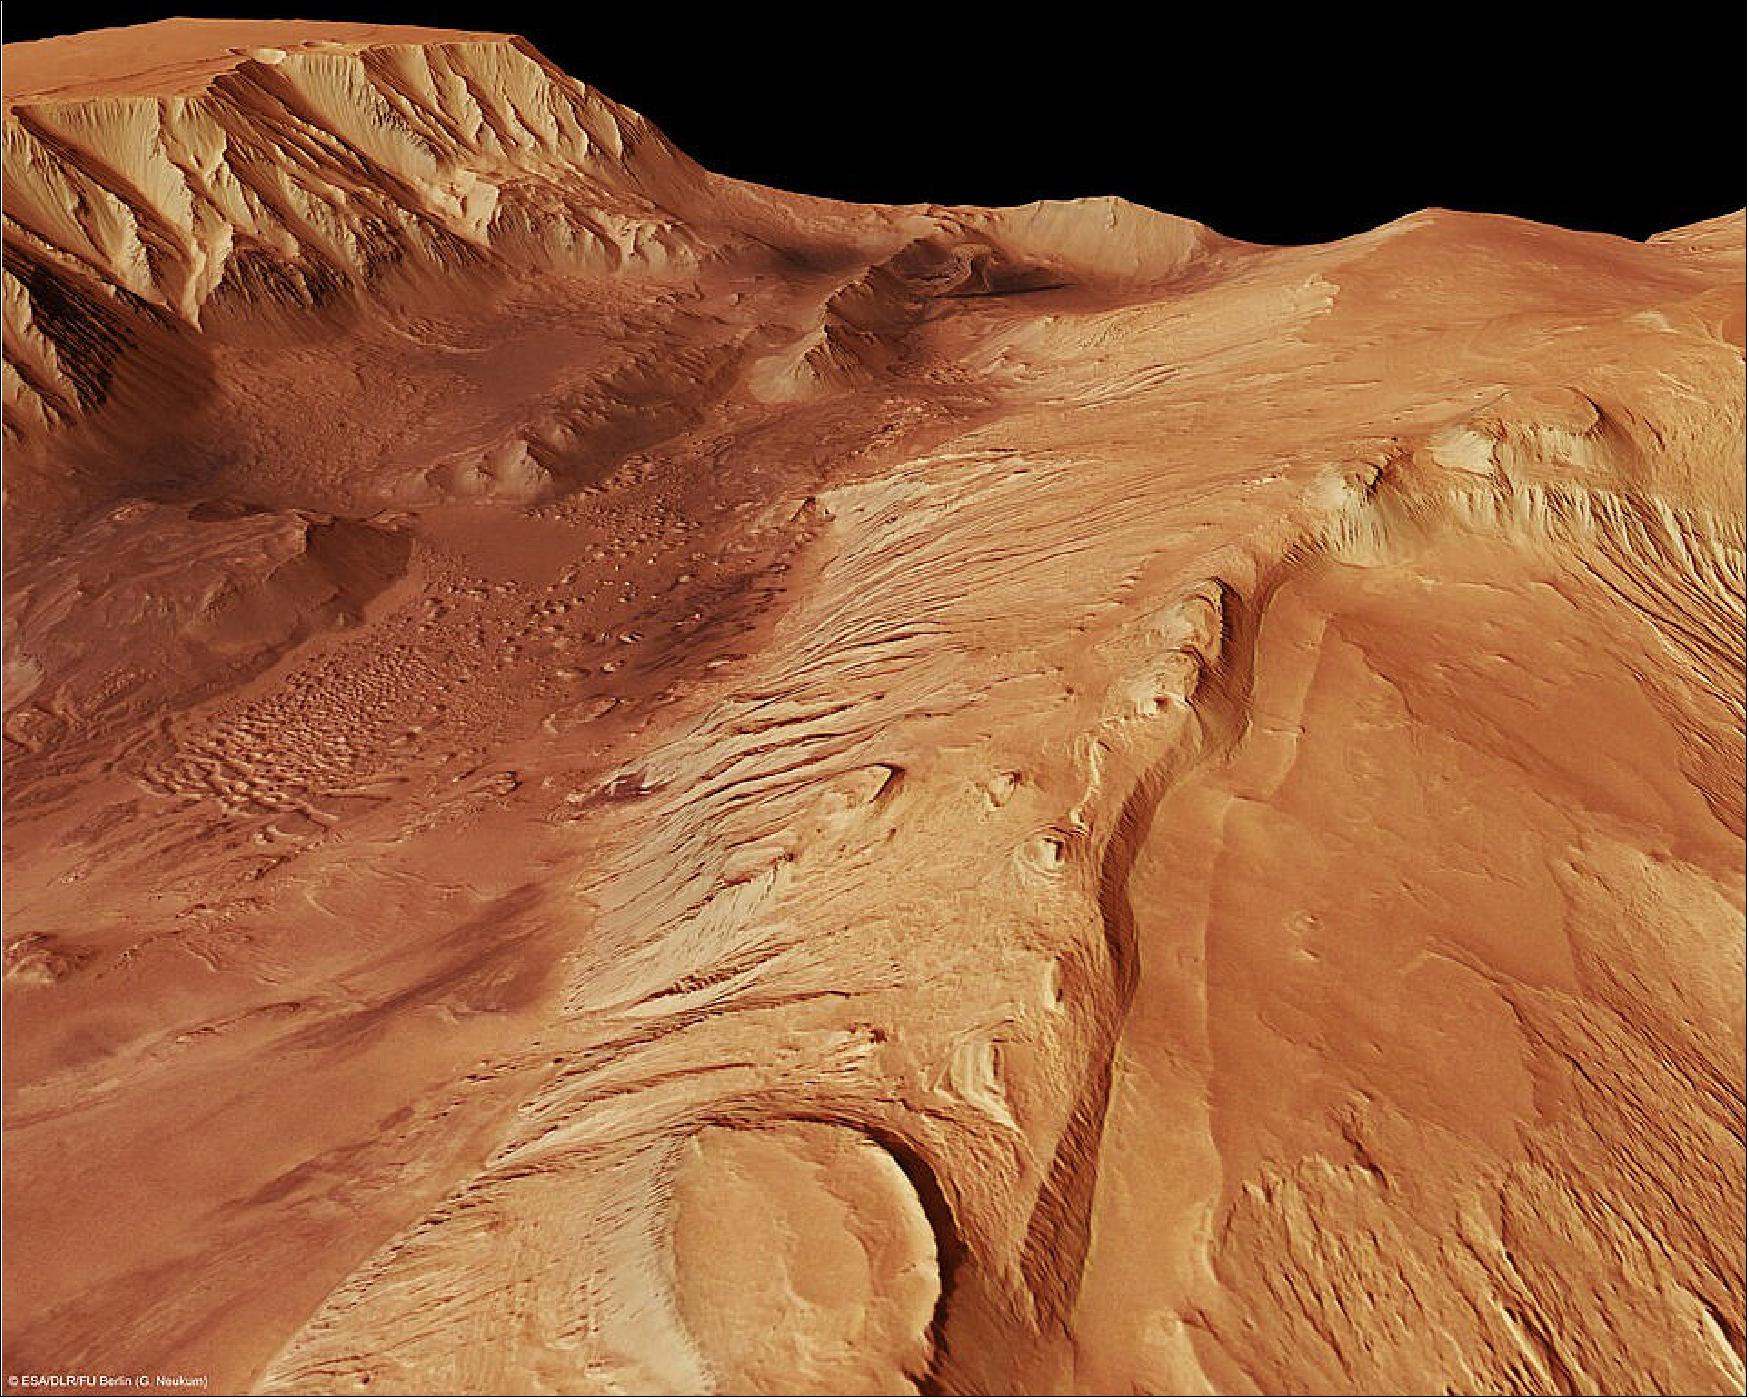 Figure 14: Mars Express took snapshots of Candor Chasma, a valley in the northern part of Valles Marineris, as it was in orbit above the region on 6 July 2006. The High Resolution Stereo Camera on the orbiter obtained the data in orbit number 3195, with a ground resolution of approximately 20 m/pixel. Candor Chasma lies at approximately 6º south and 290º east (image credit: ESA/DLR/FU Berlin (G. Neukum), CC BY-SA 3.0 IGO)